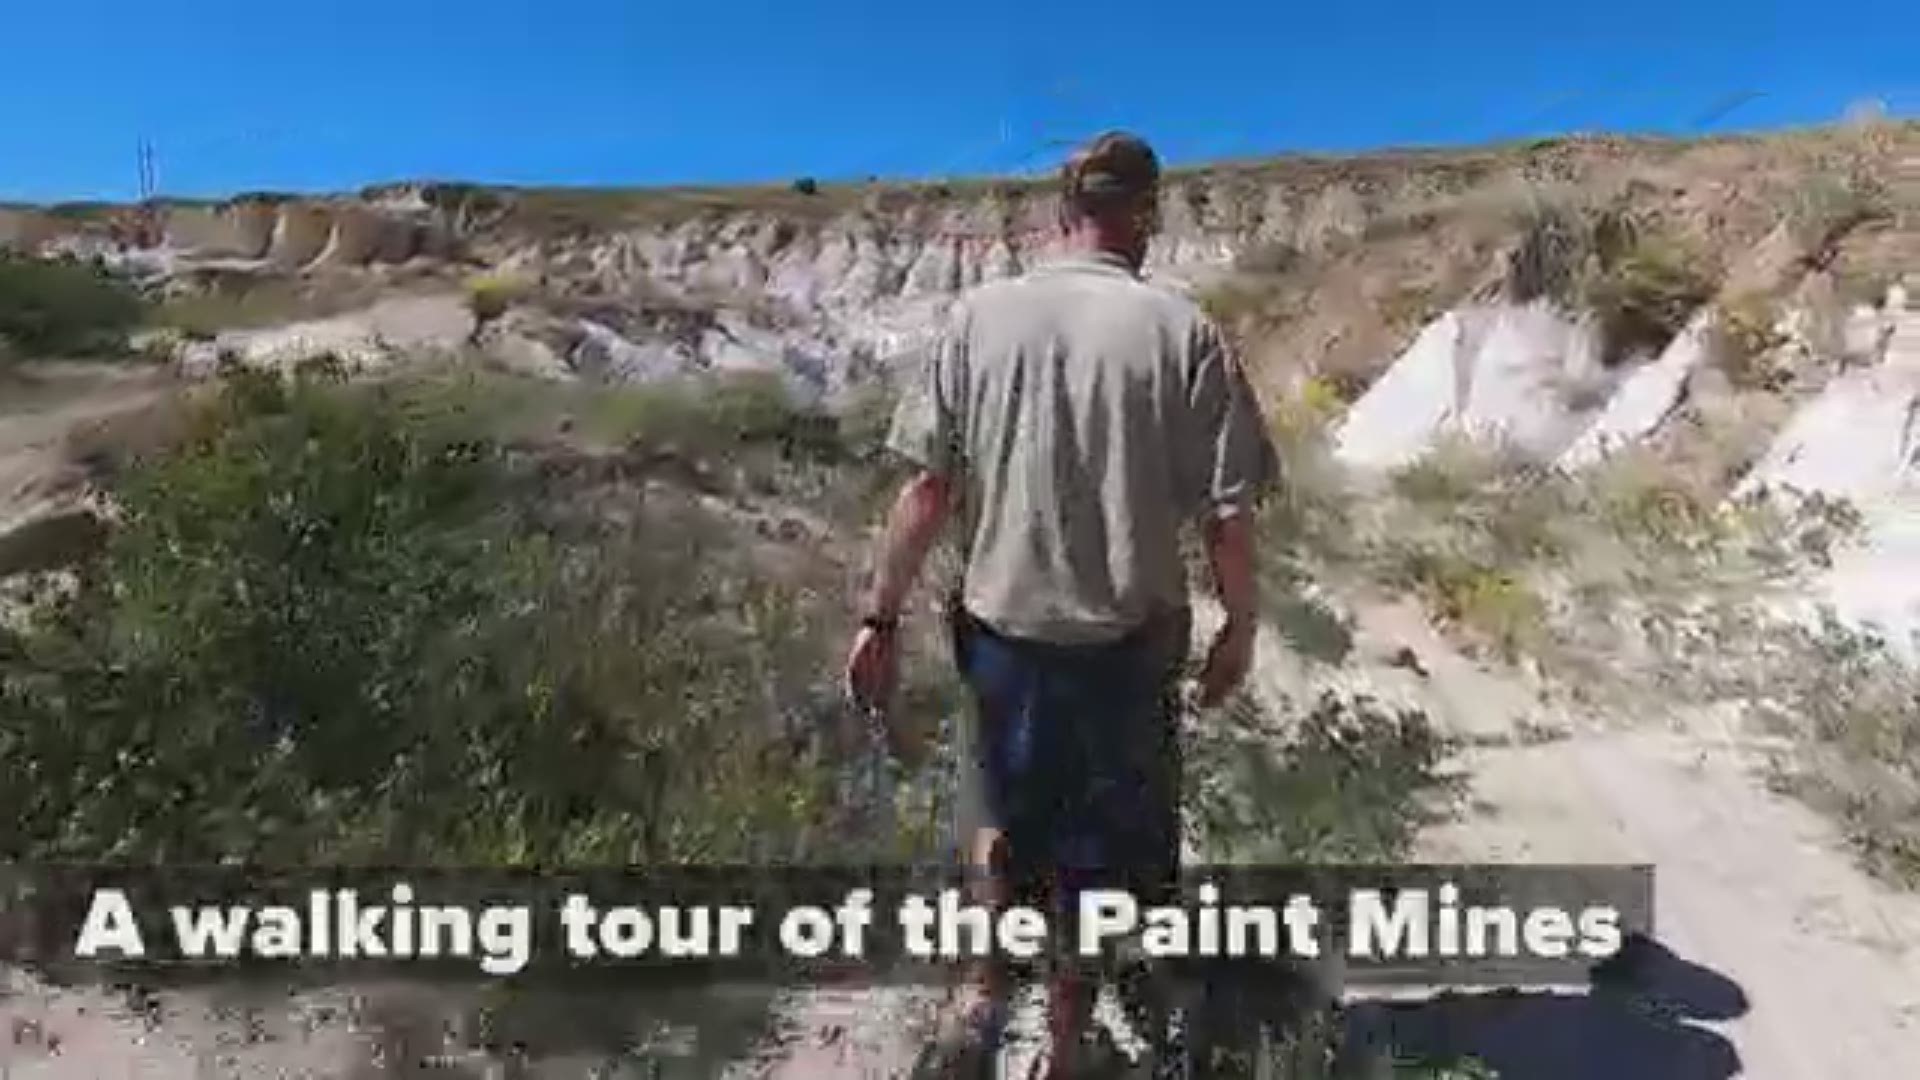 A park ranger for El Paso County gave 9NEWS Photojournalist Jeremy Moore a tour of the Paint Mines near Calhan, Colorado.